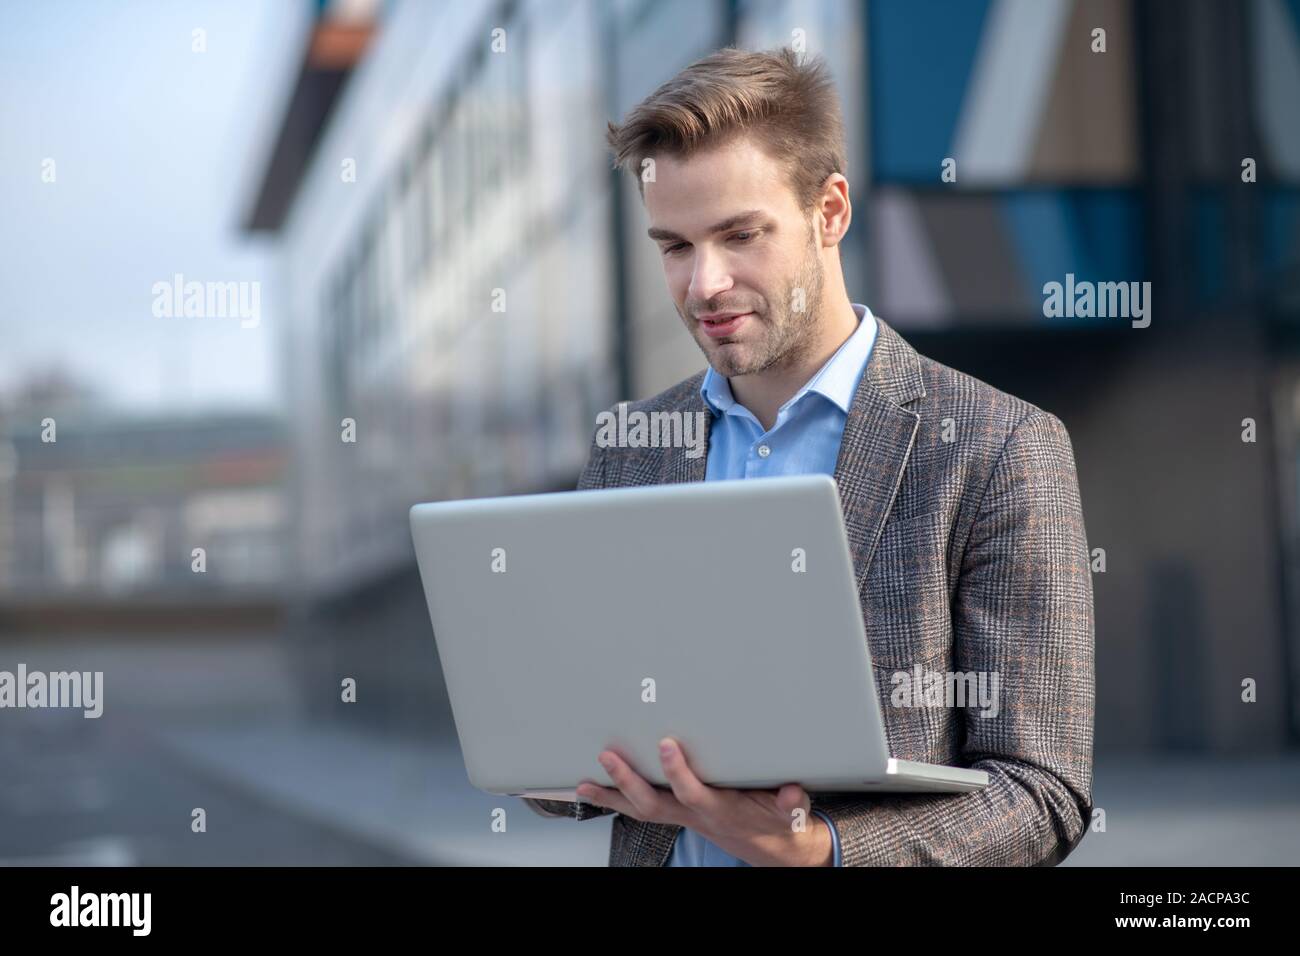 Young man in a blue shirt holding a laptop Stock Photo